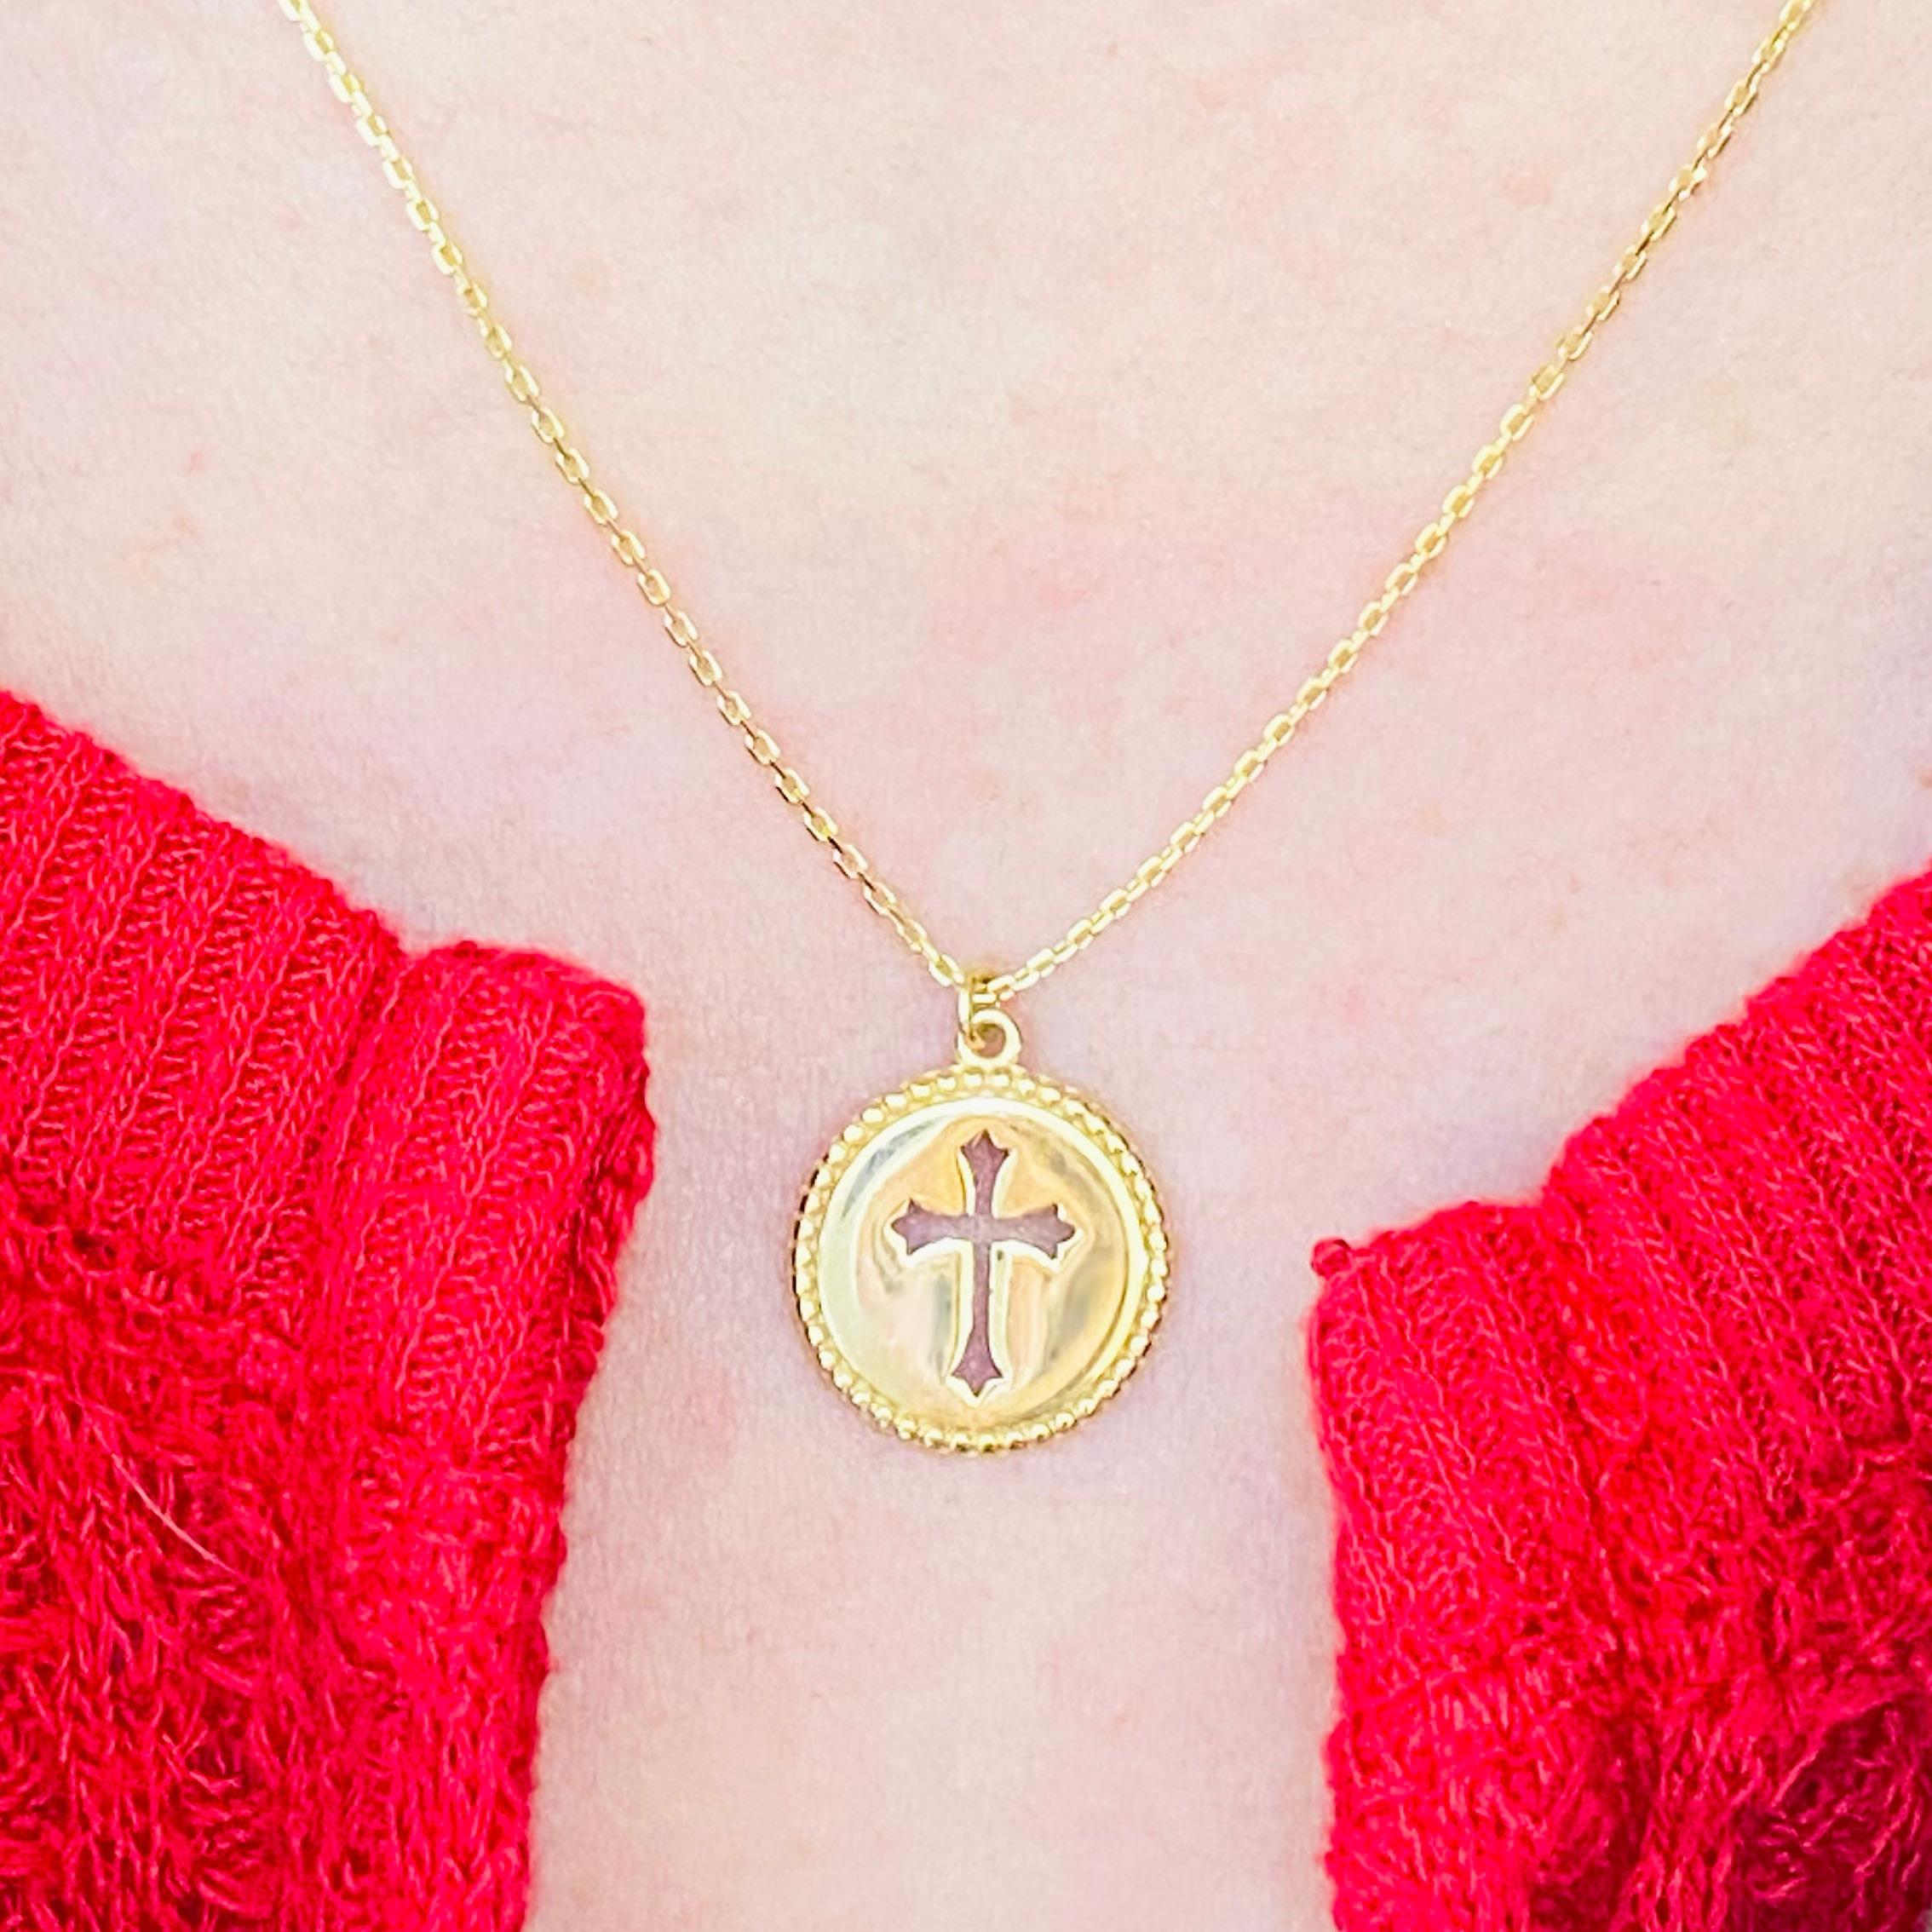 This gorgeous, intricate cross disk pendant is a stunning and striking design. The cross pendant is made in solid 14 karat yellow gold. The disk design has handmade millgrain texture. This pendant is on an 18 inch cable chain that compliments the